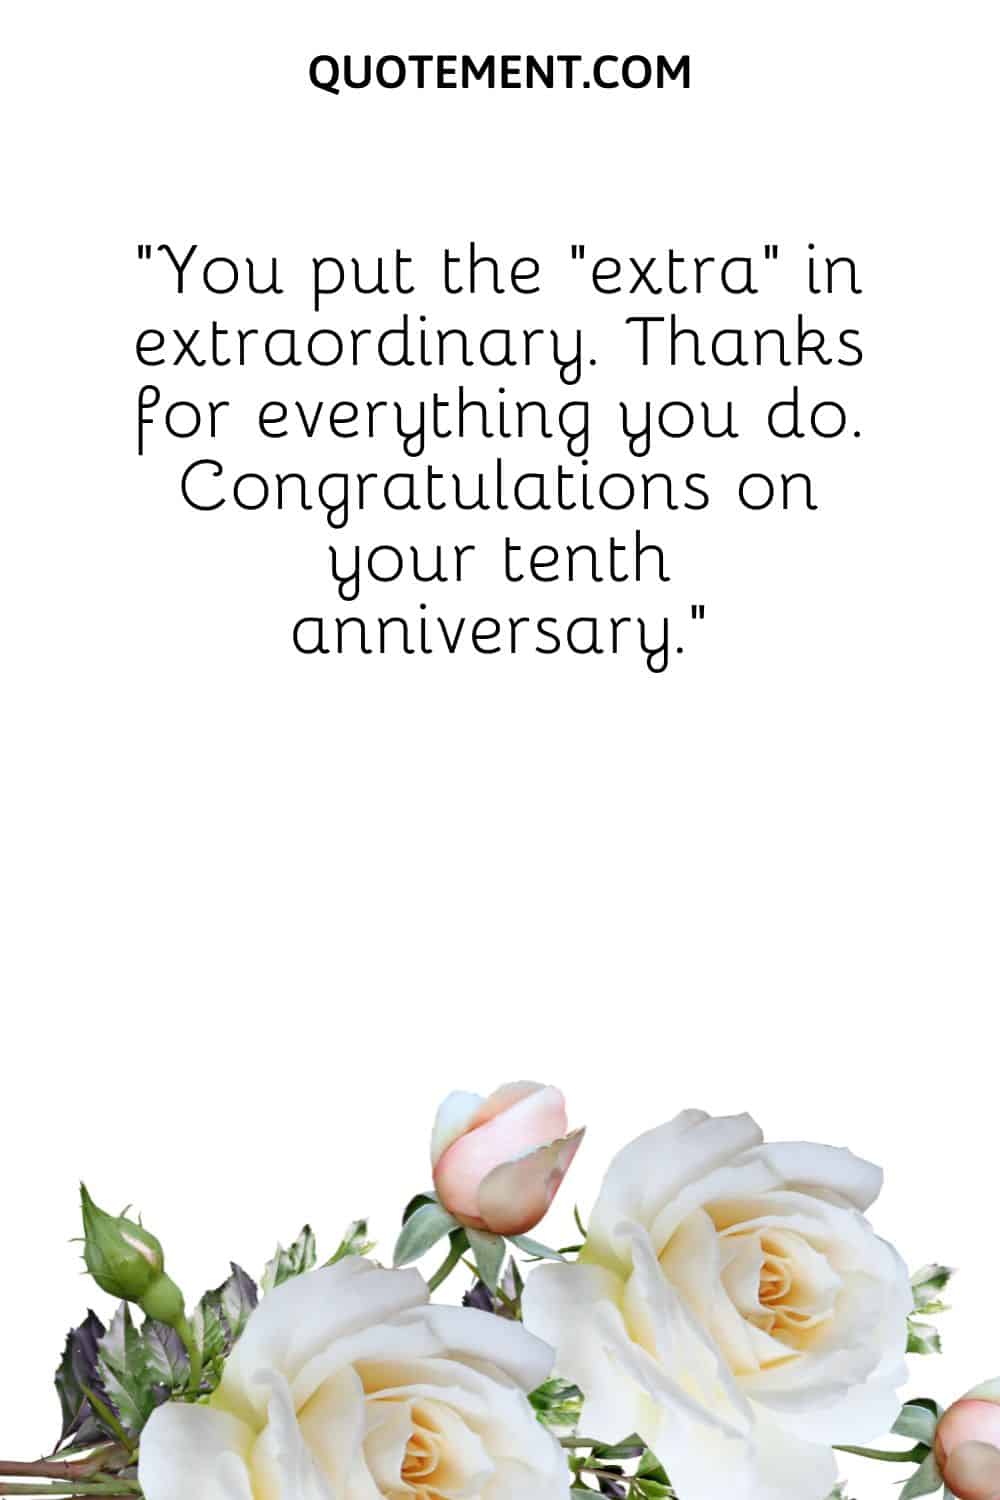 “You put the “extra” in extraordinary. Thanks for everything you do. Congratulations on your tenth anniversary.”